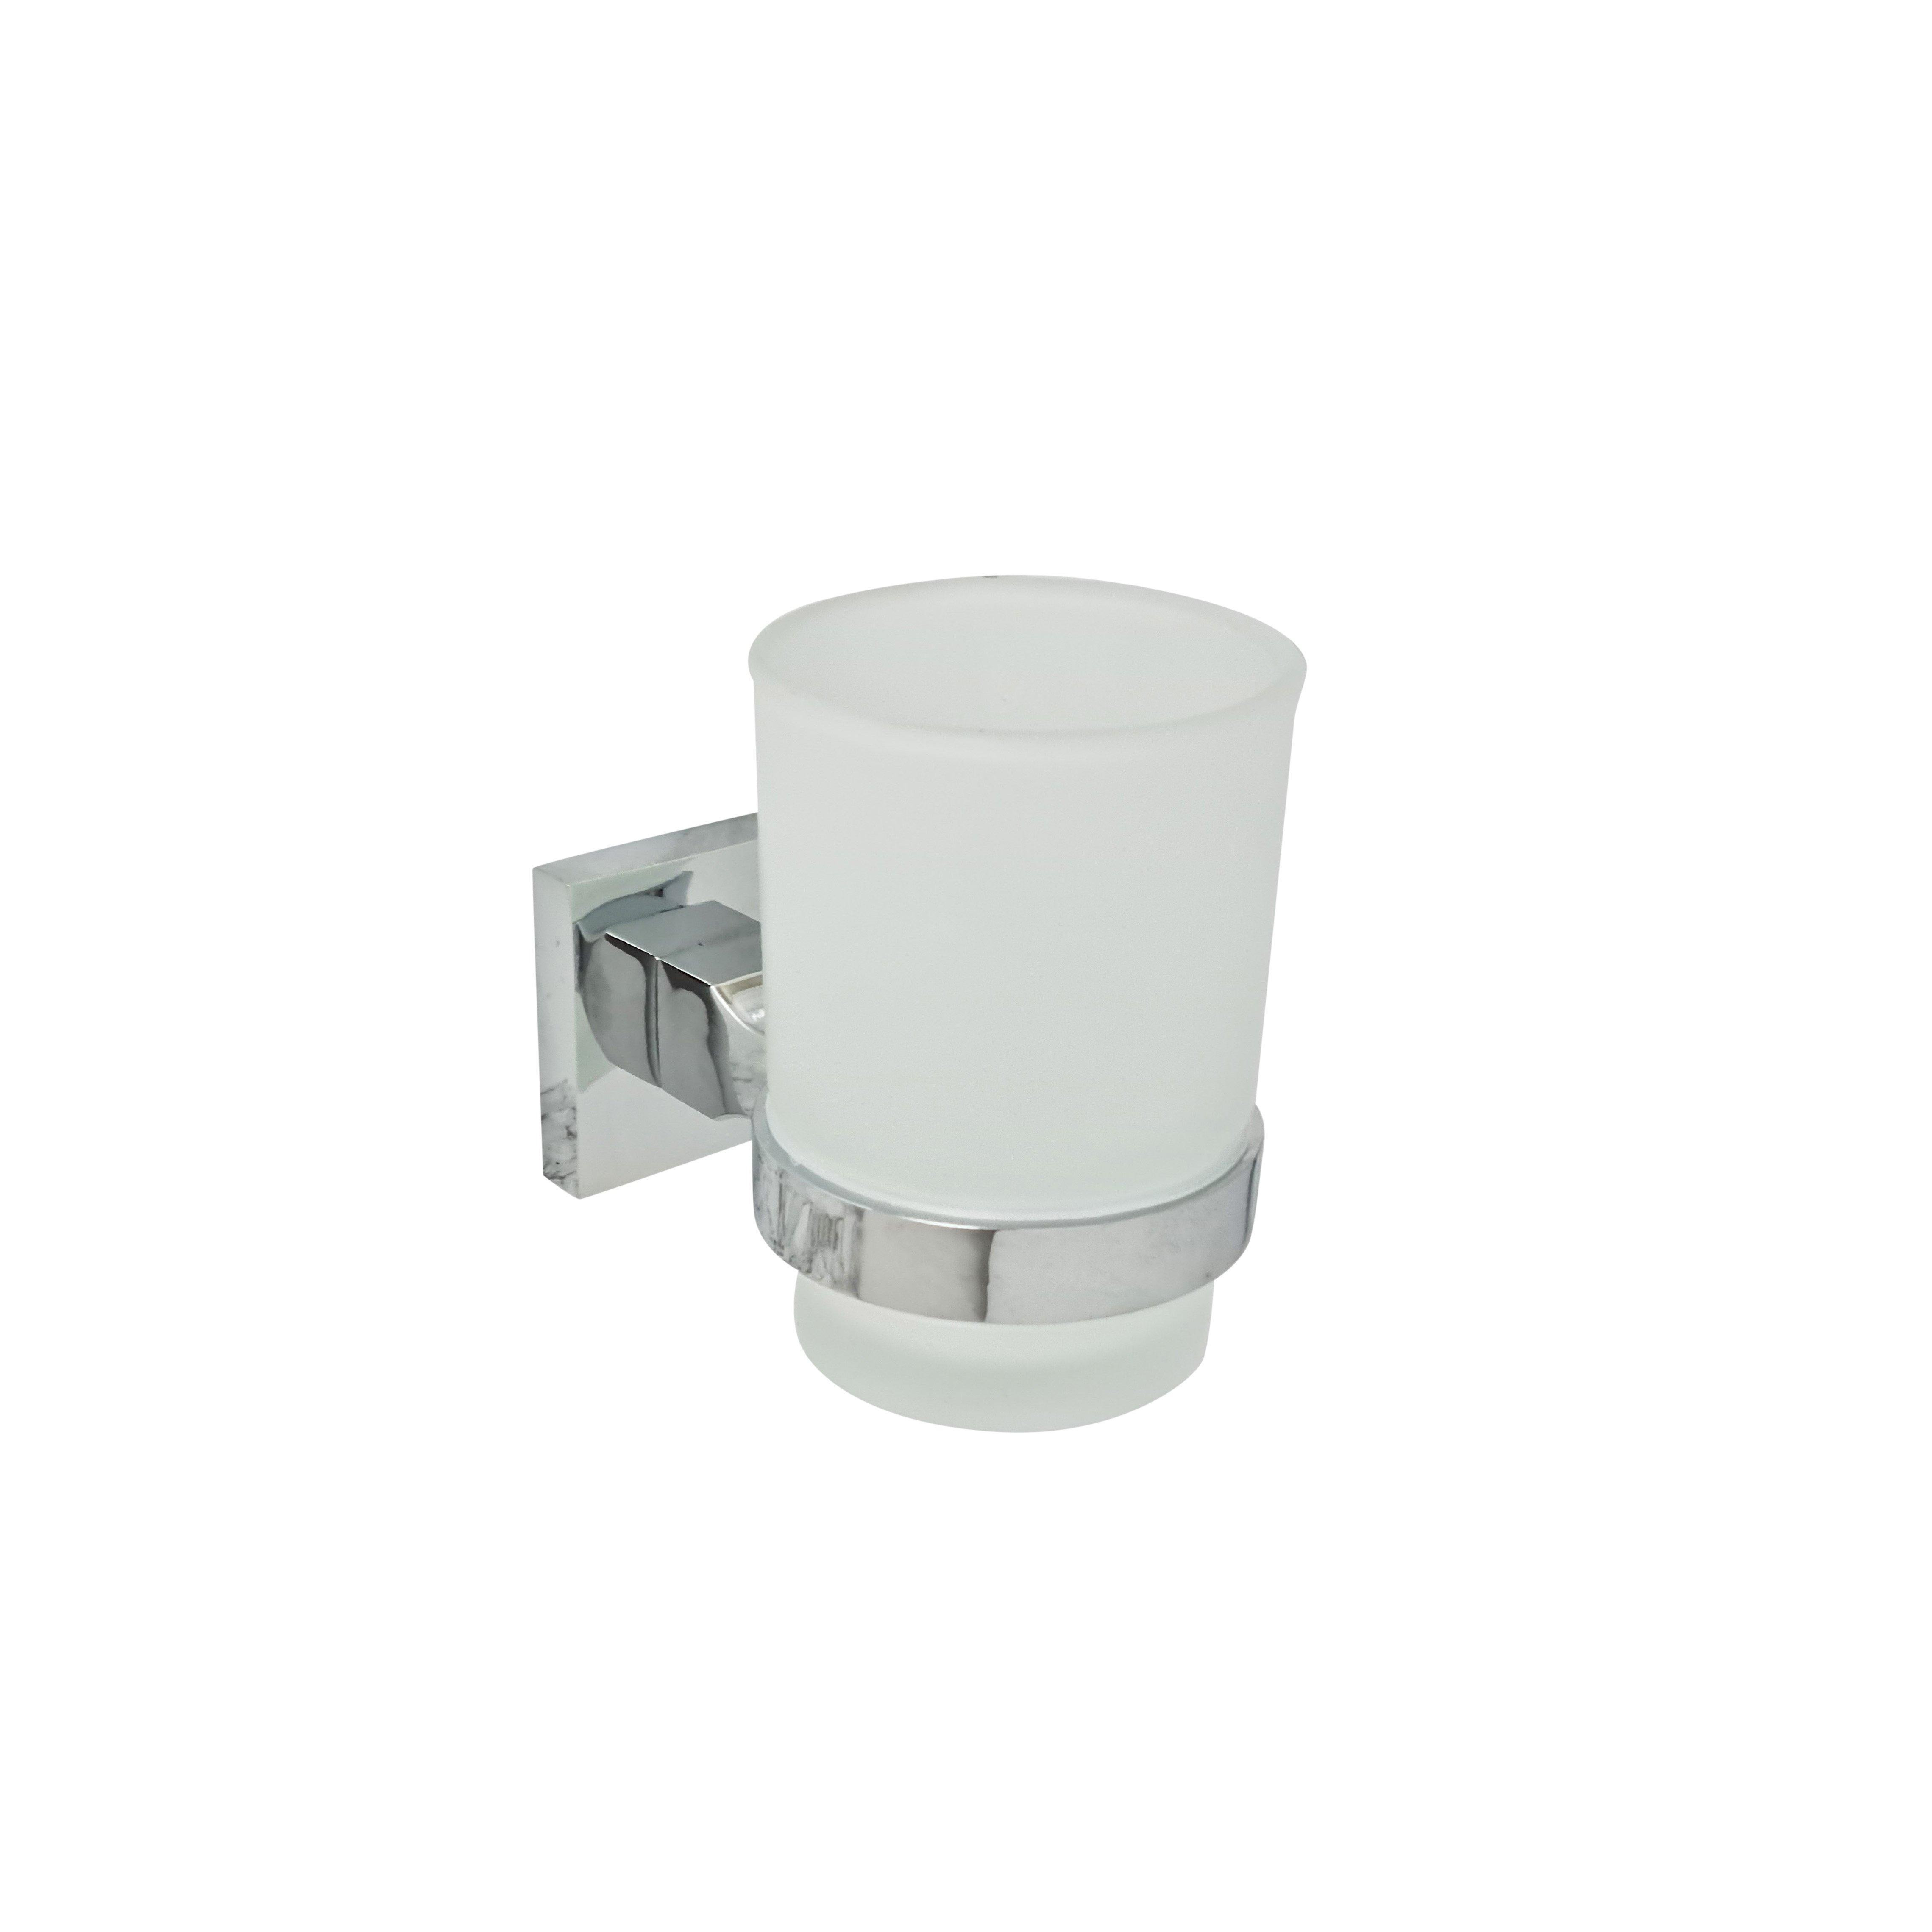 Chrome Toothbrush Holder with Glass Cup Wall Mounted Bathroom Accessory - image 1